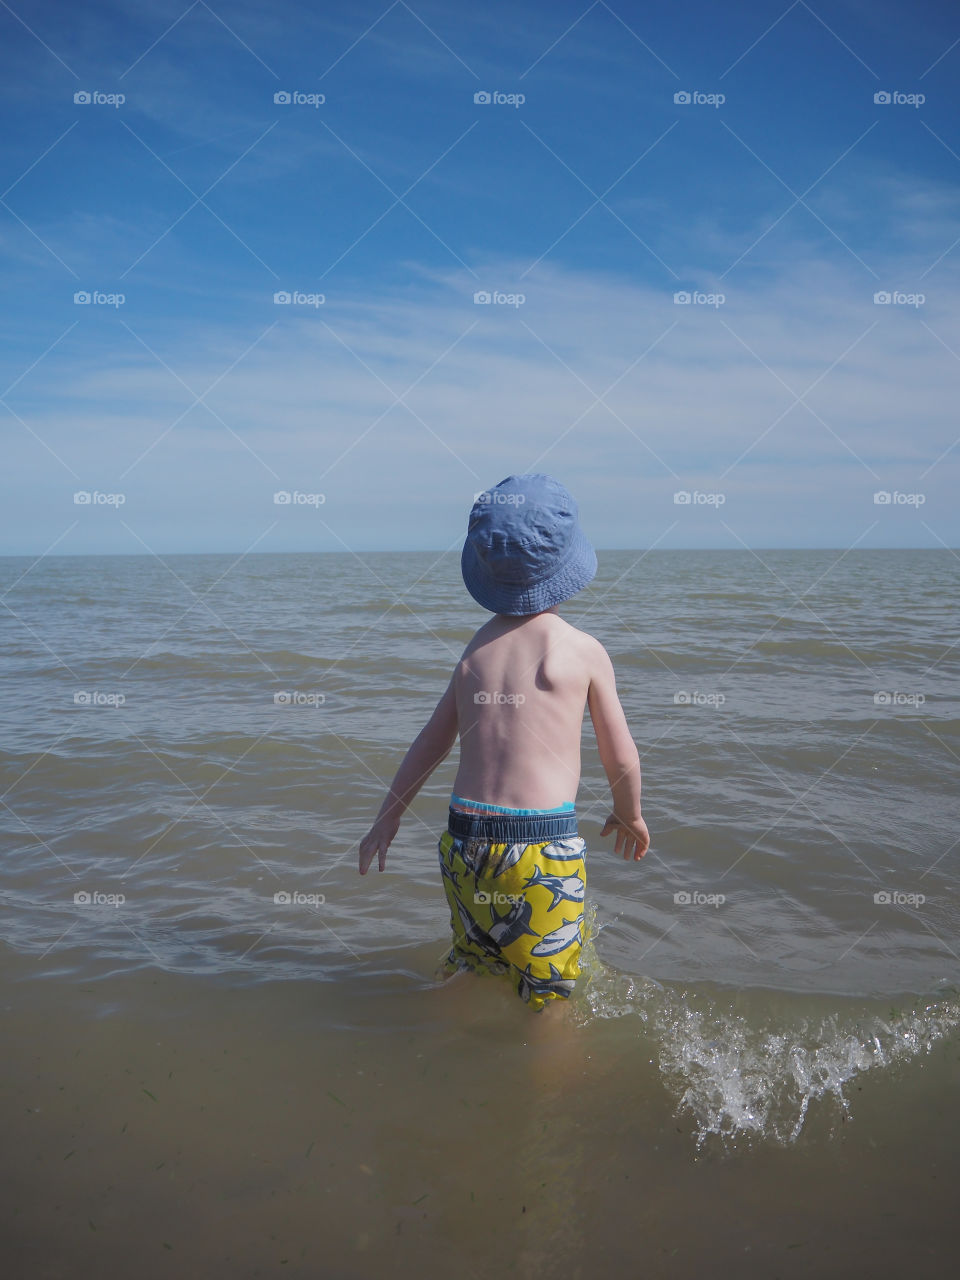 Toddler boy playing in the gentle waves at the beach shores of Port Burwell, Ontario, Canada